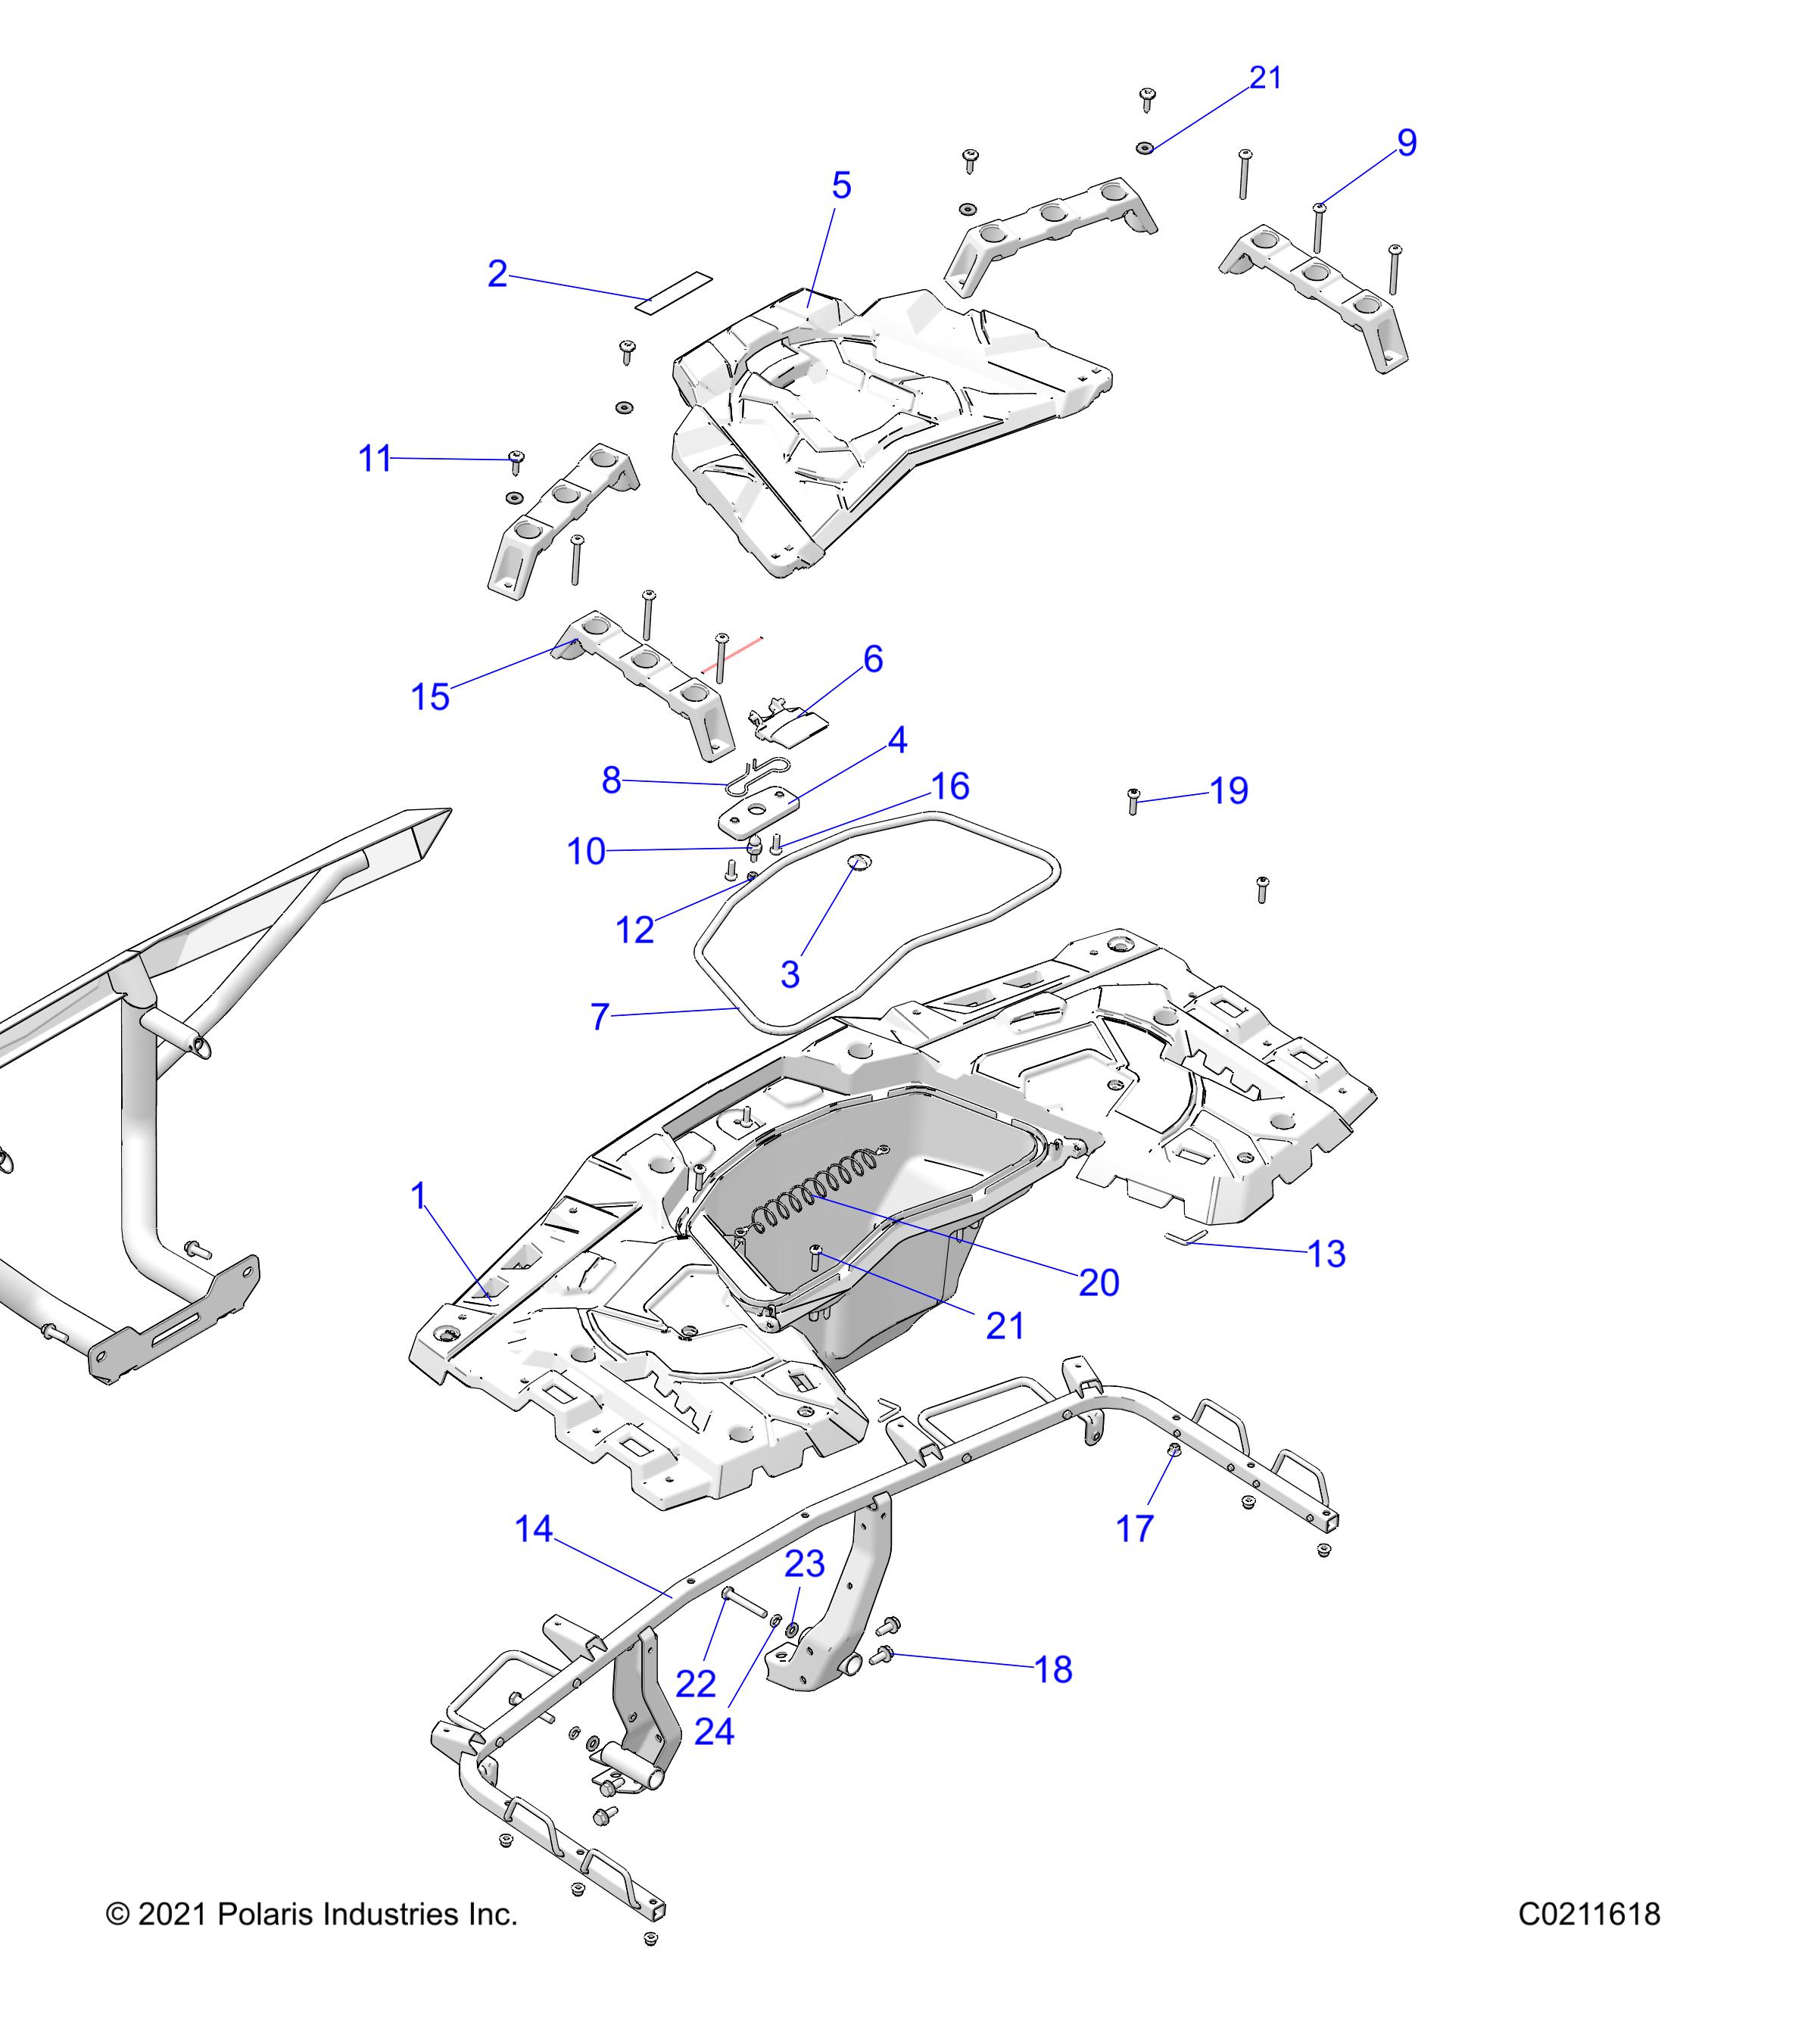 Part Number : 5526451 SEAL-BOX REAR